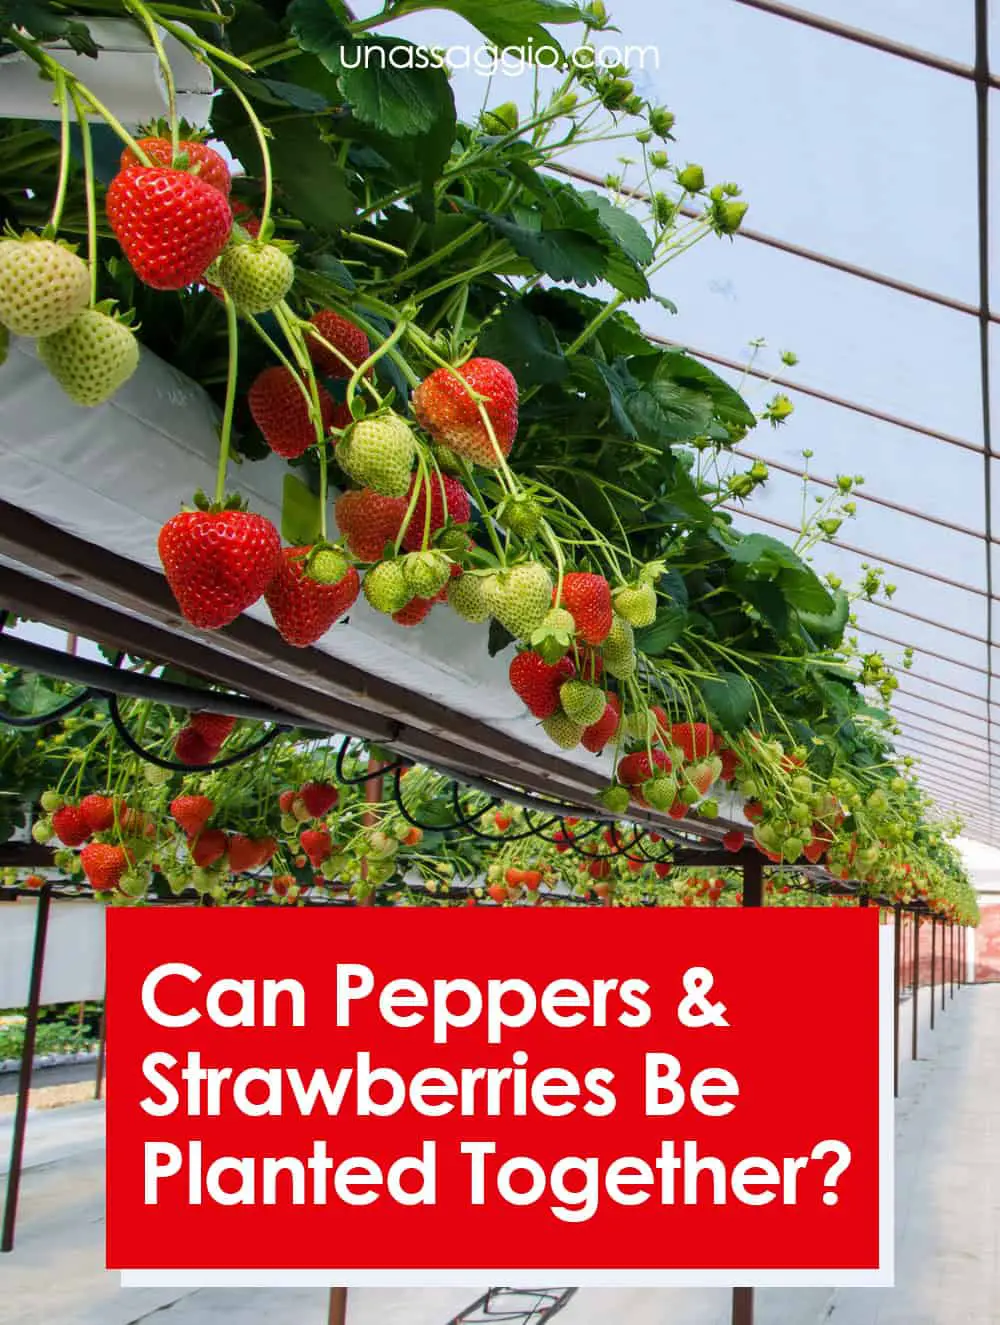 Can Peppers And Strawberries Be Planted Together?